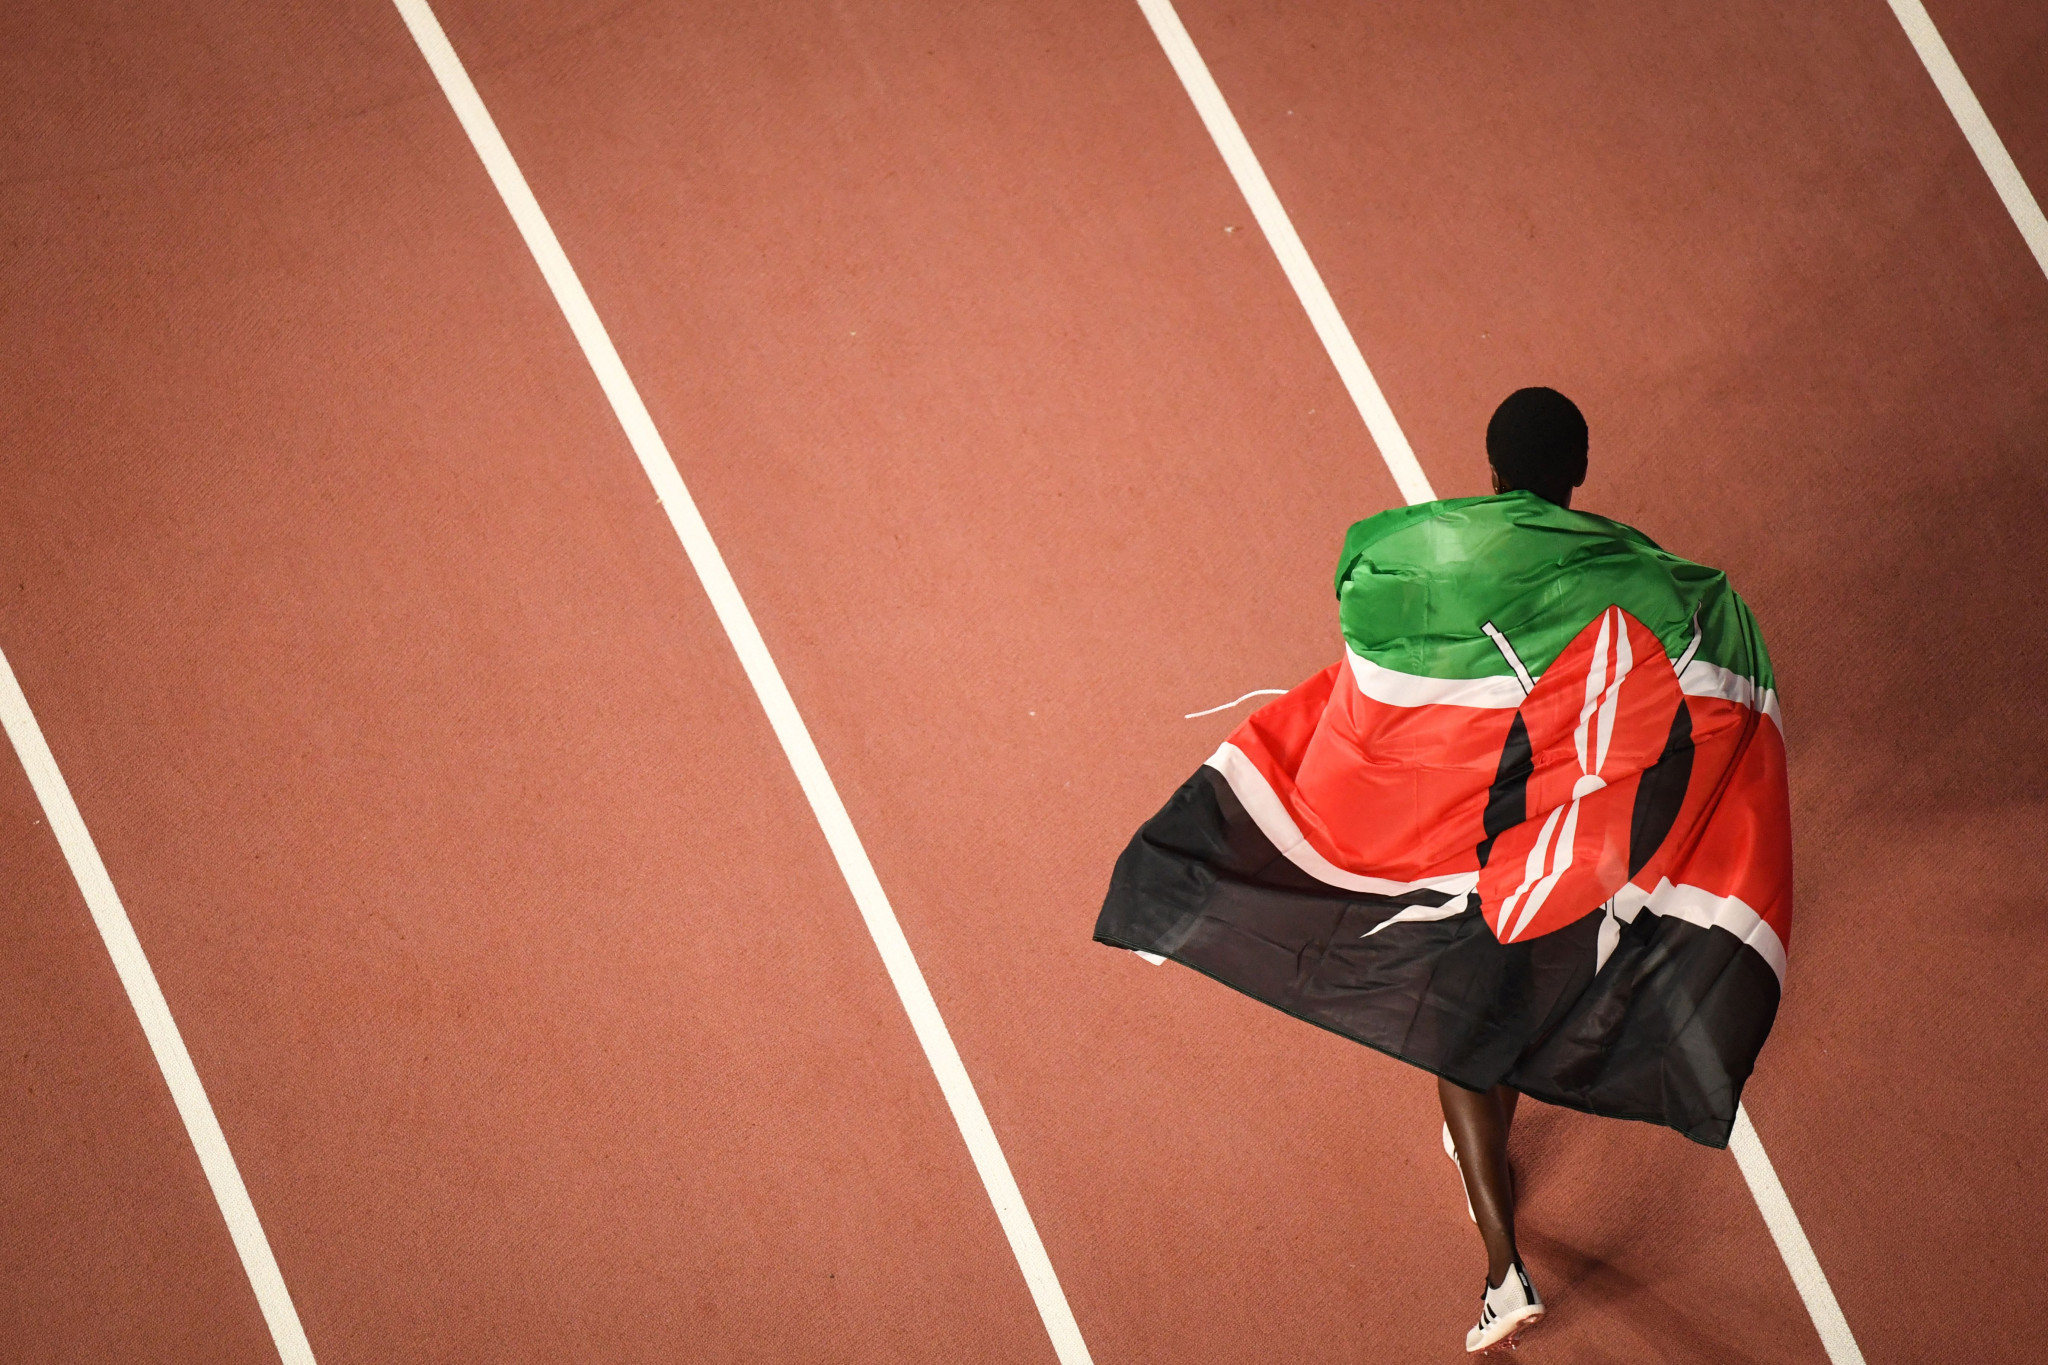 James Mwangi Wangari is the latest Kenyan athlete to be provisionally suspended by the Athletics Integrity Unit ©Getty Images